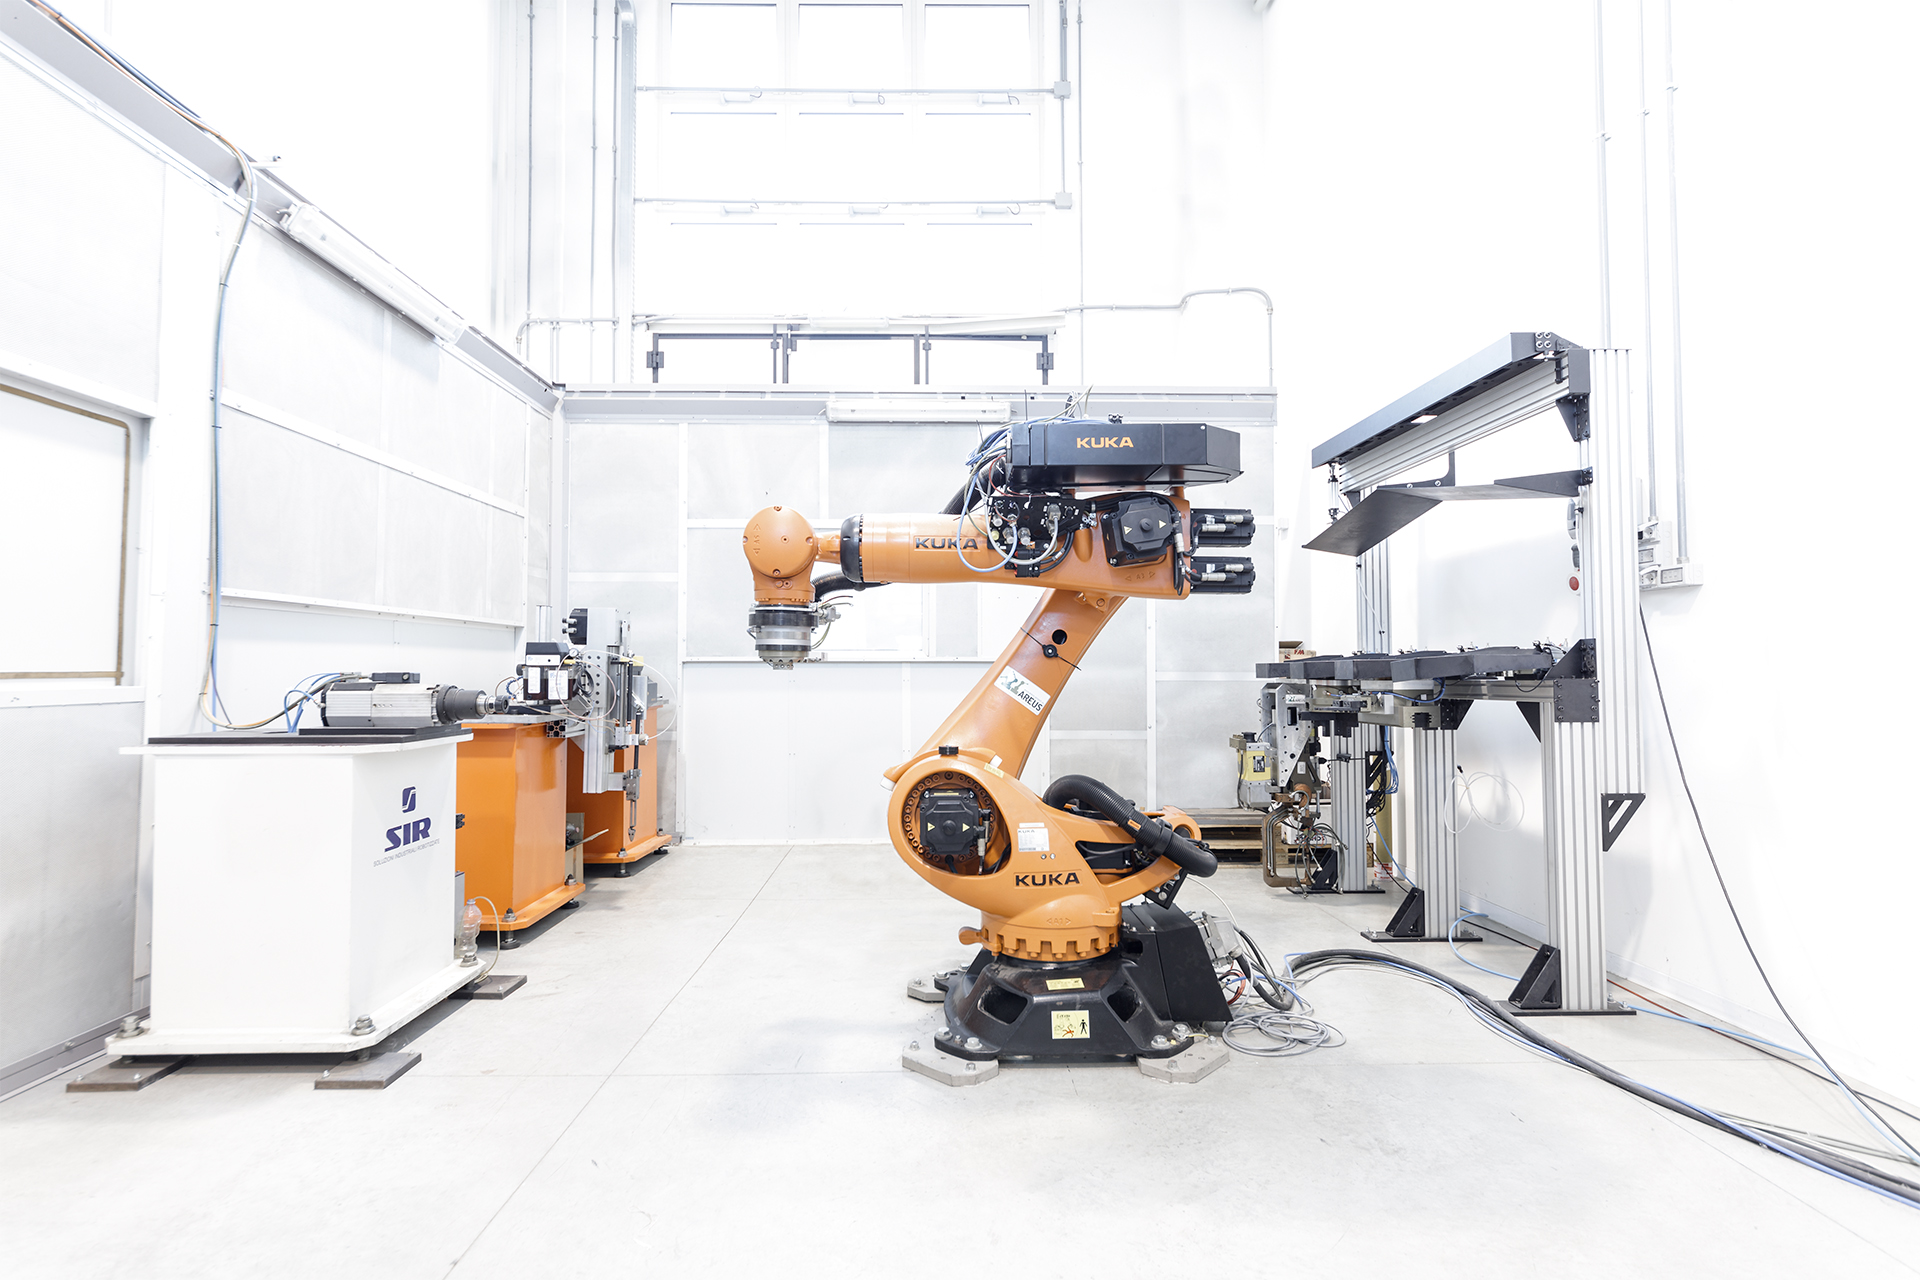 The rise of robots in machining applications